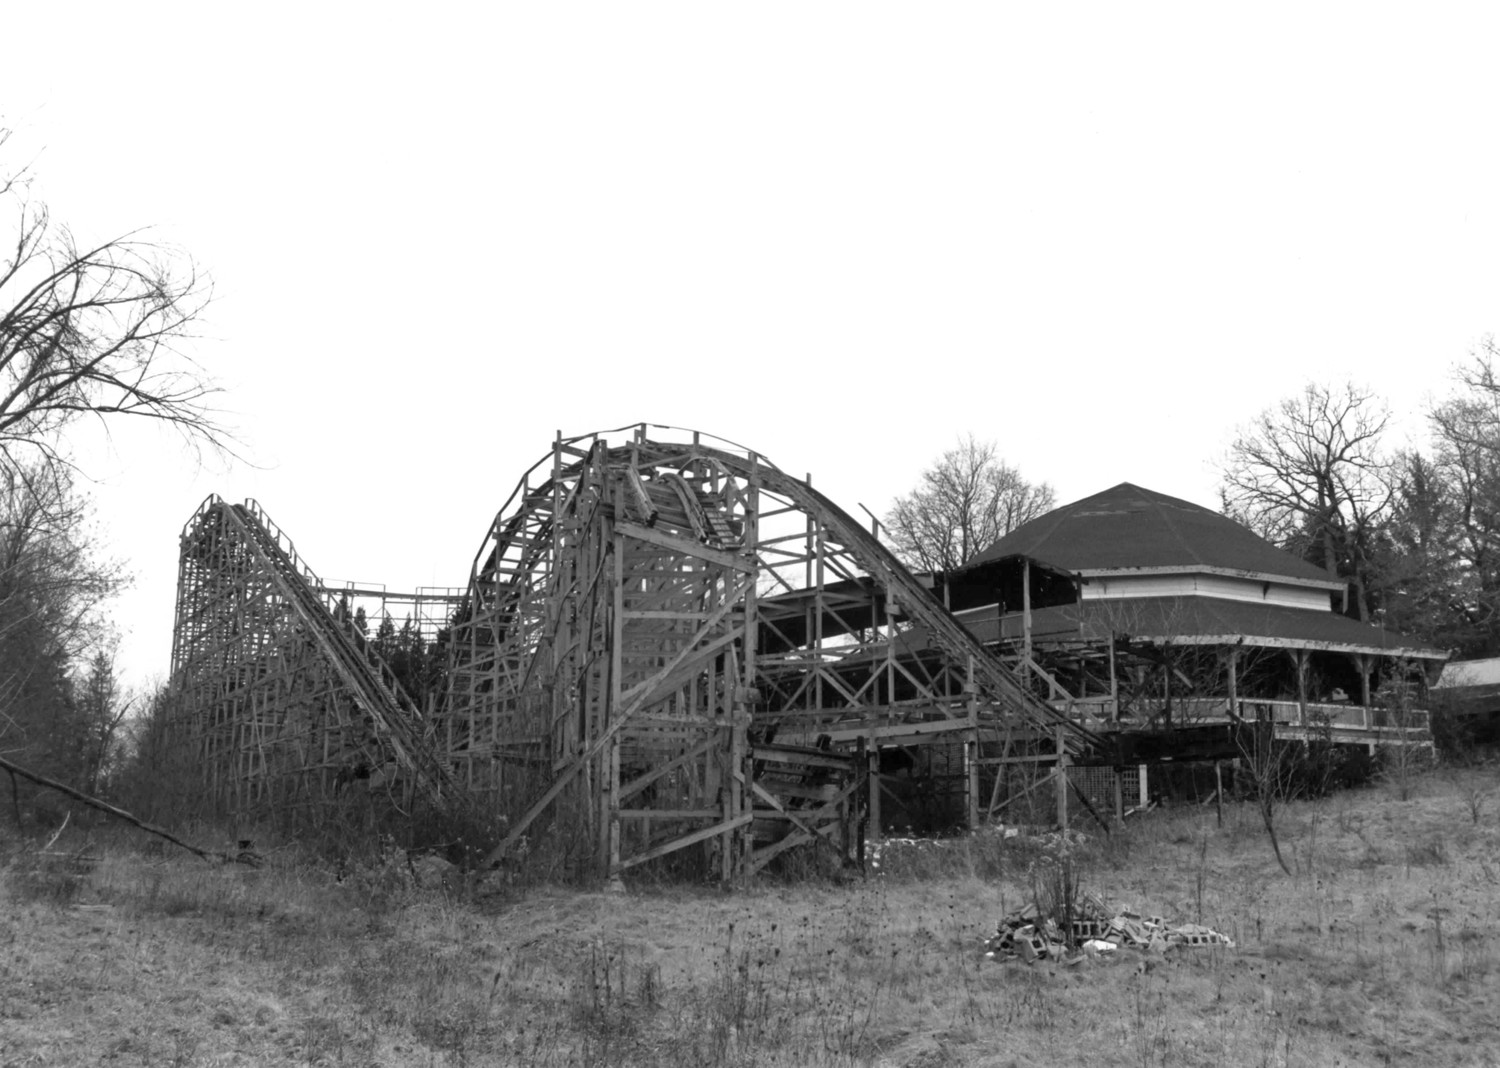 Idora Park, Youngstown Ohio Wildcat roller coaster and the merry-go-round, looking northeast (1992)